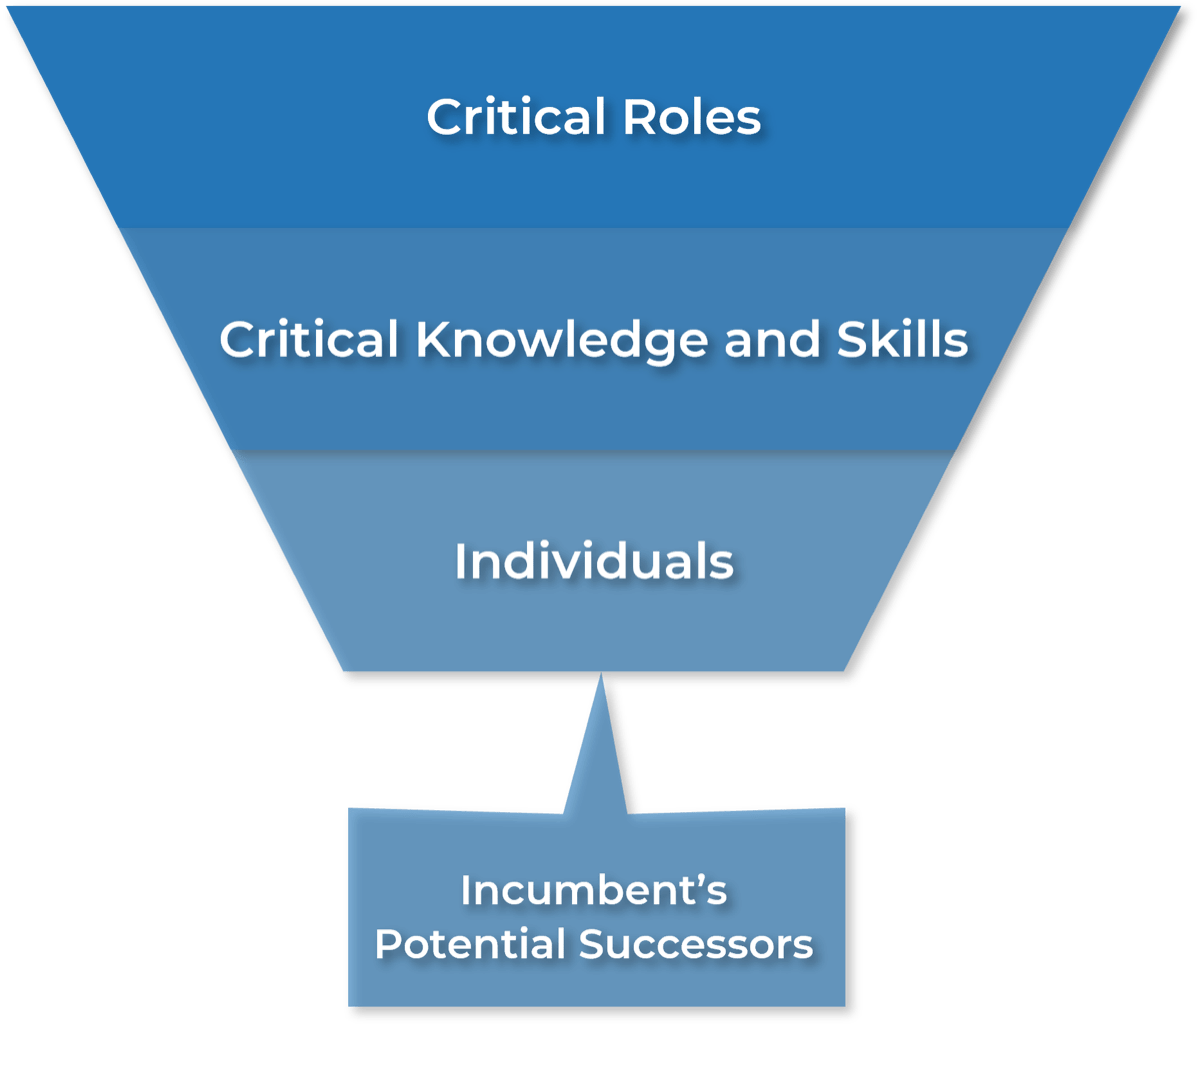 Funnel titled 'Succession Planning' with 'Critical Roles' at the top of the funnel, 'Critical Knowledge and Skills' as the middle of the funnel, 'Individuals' as the bottom of the funnel, and it drains into 'Incumbent's Potential Successors'.